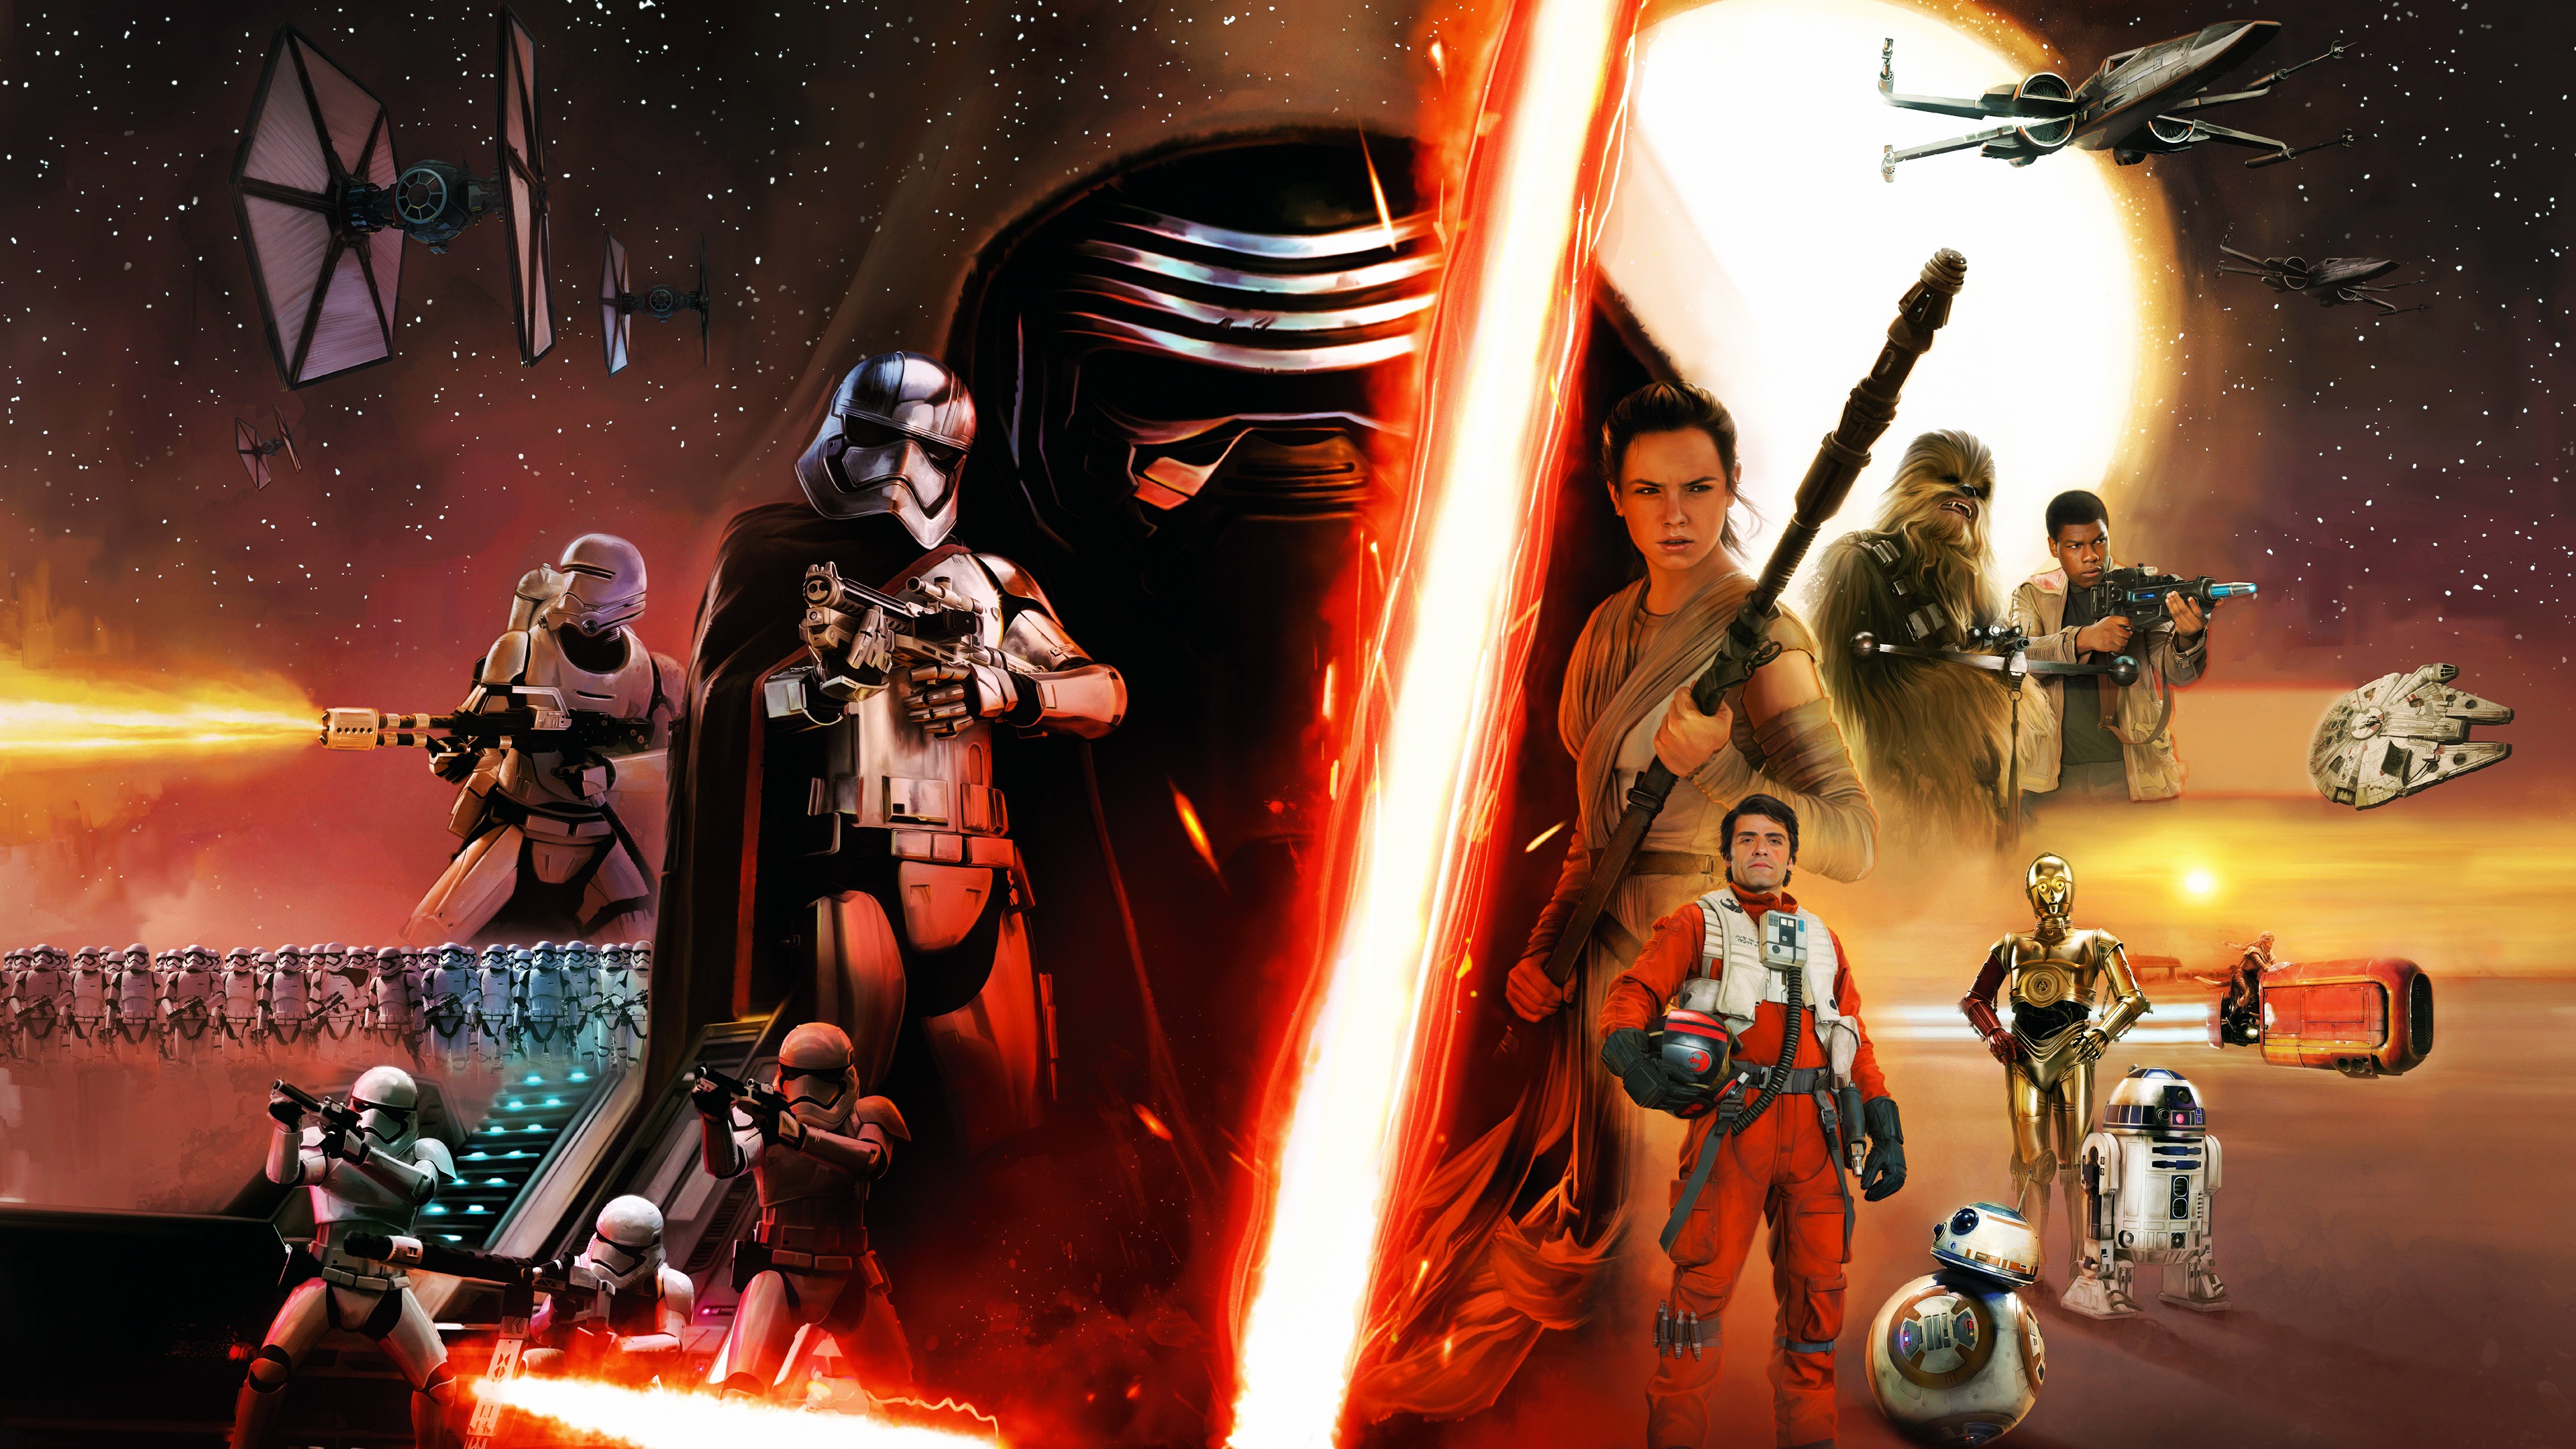 Star Wars: Episode VII The Force Awakens Wallpapers HD / Desktop and